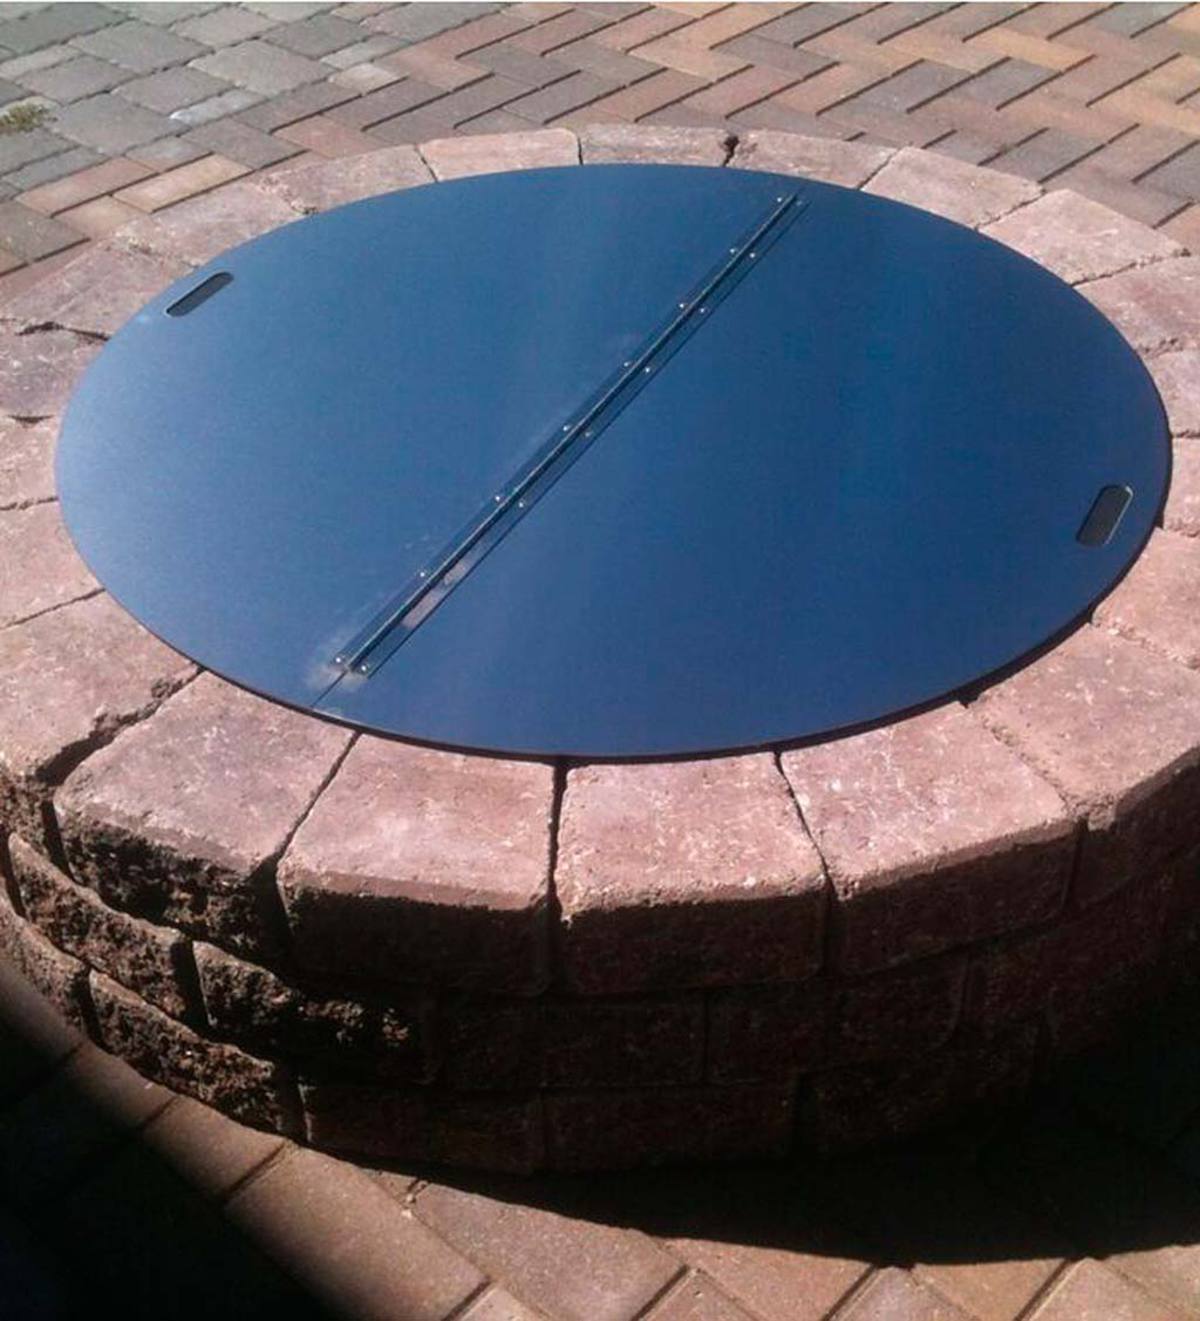 Stainless Steel Round Fire Pit Cover, Mosaic Fire Pit Cover